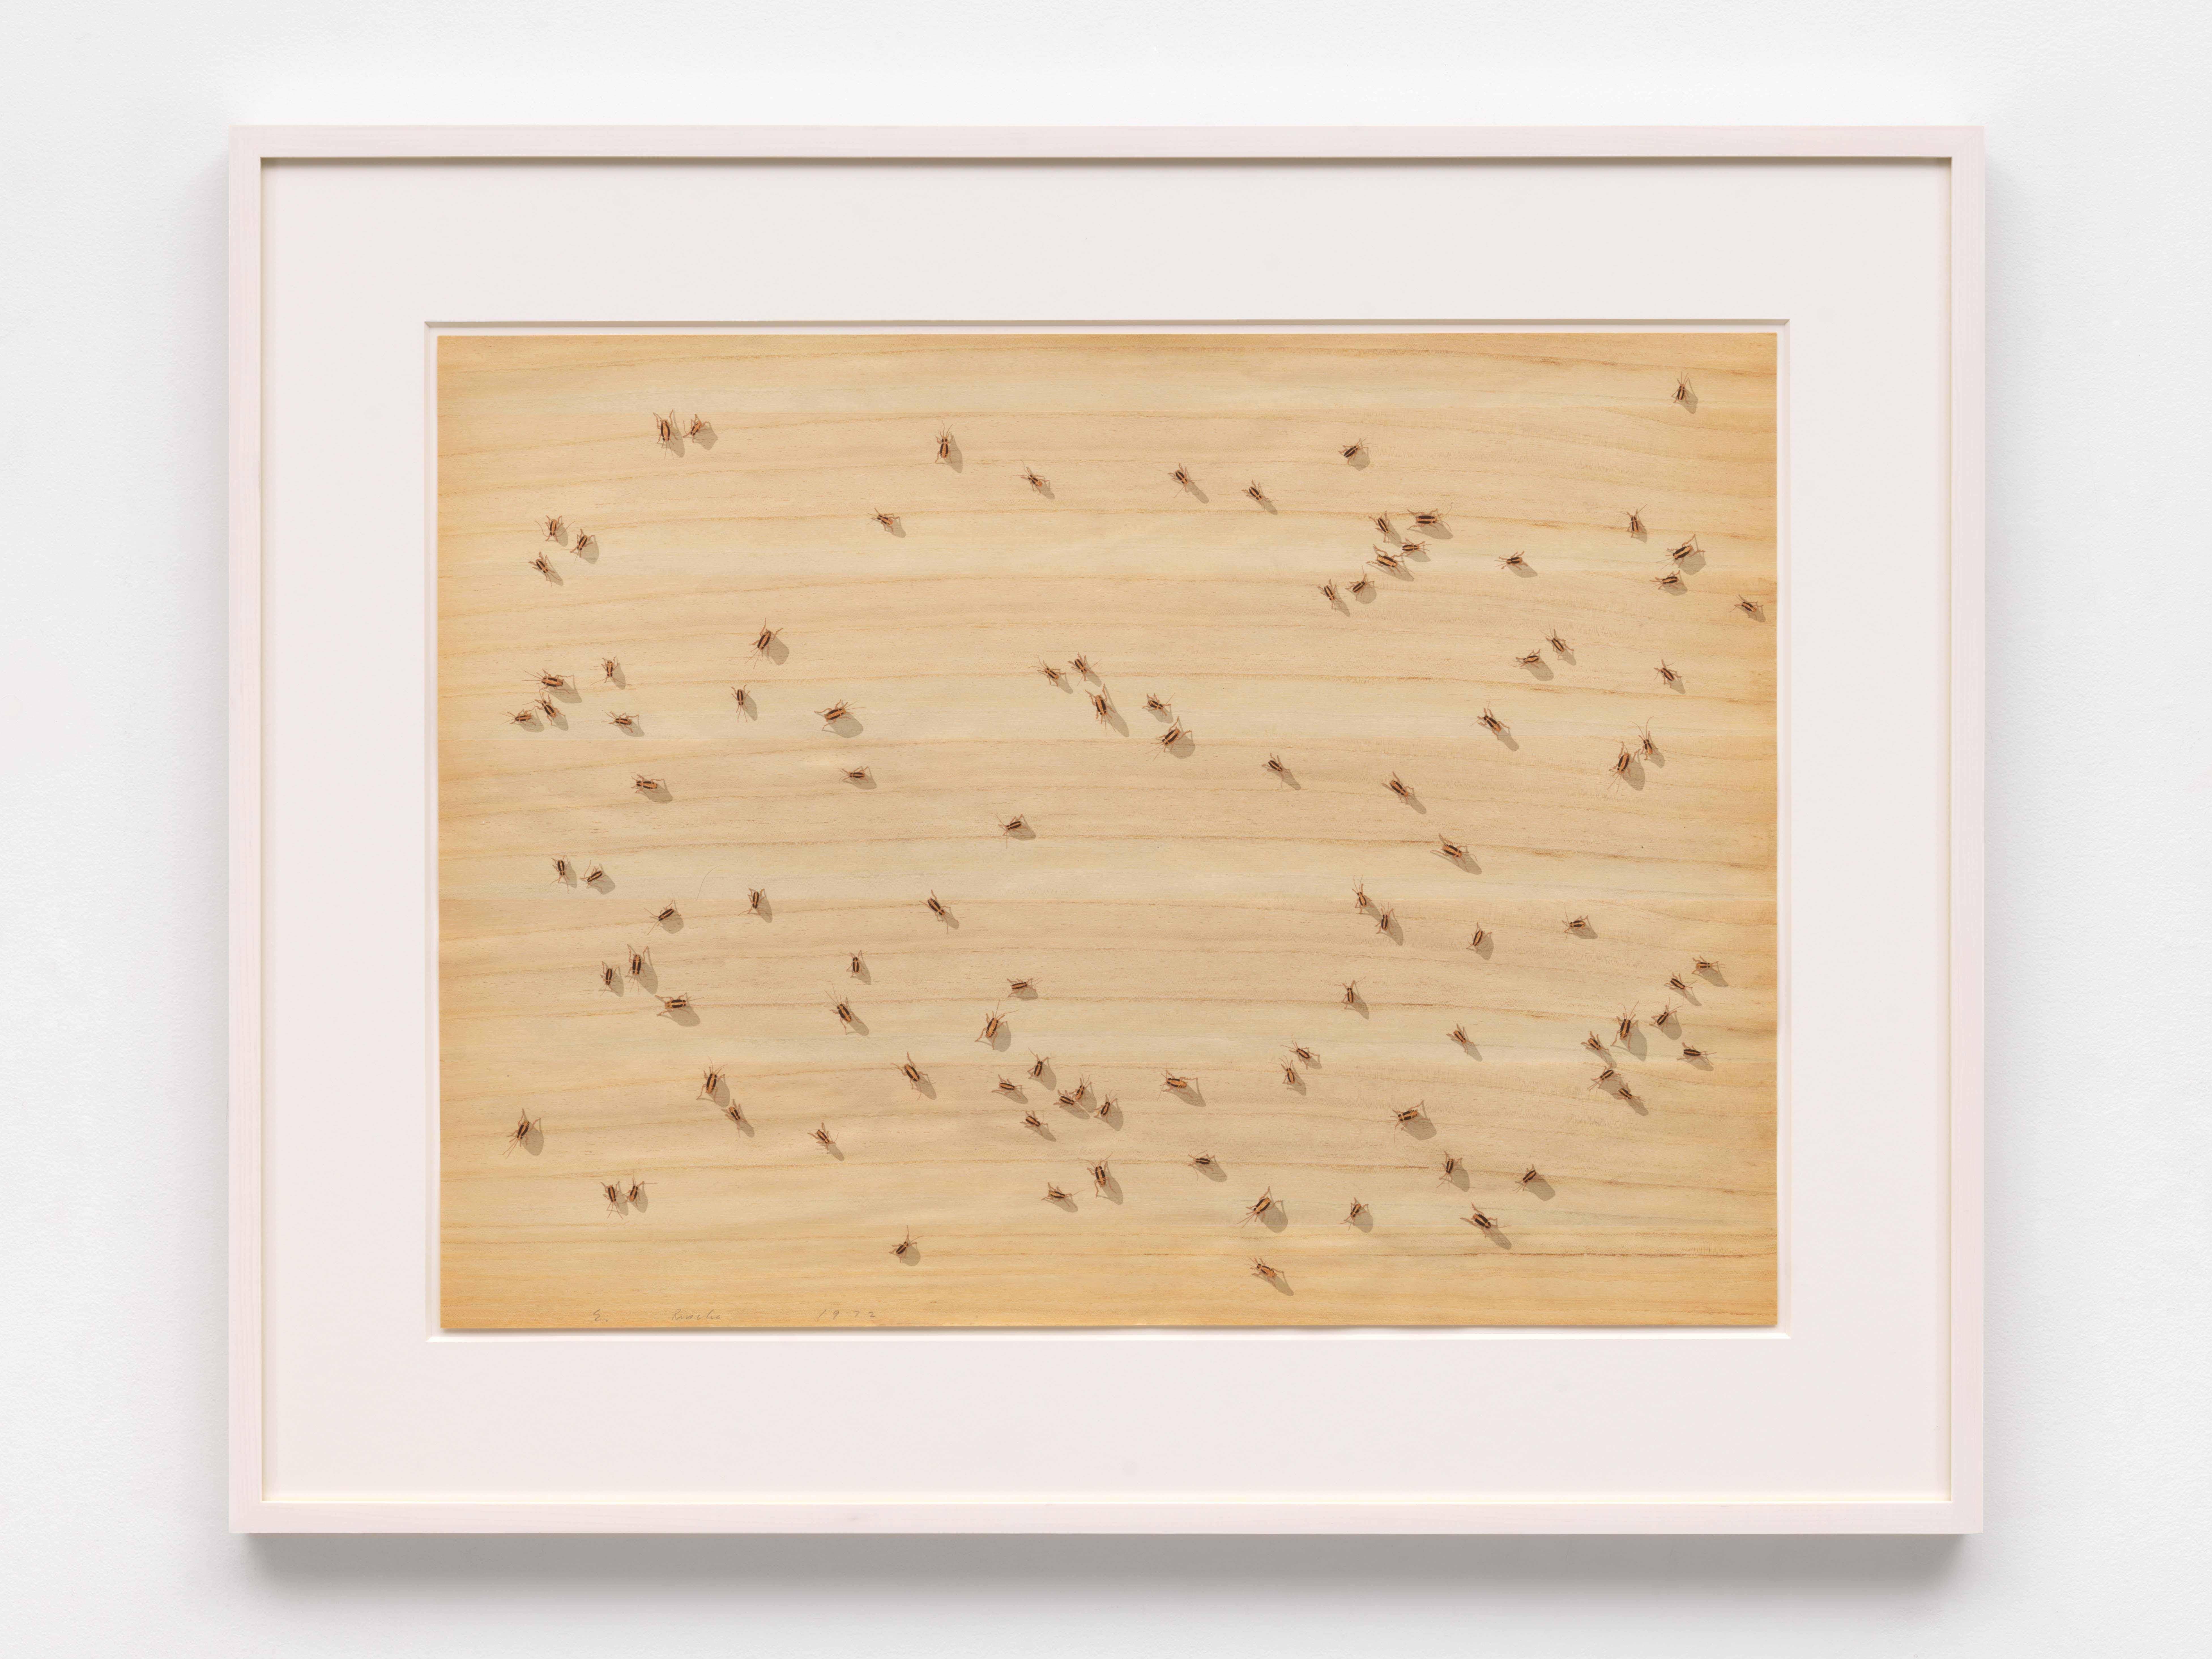 Insects - Contemporary Print by Ed Ruscha